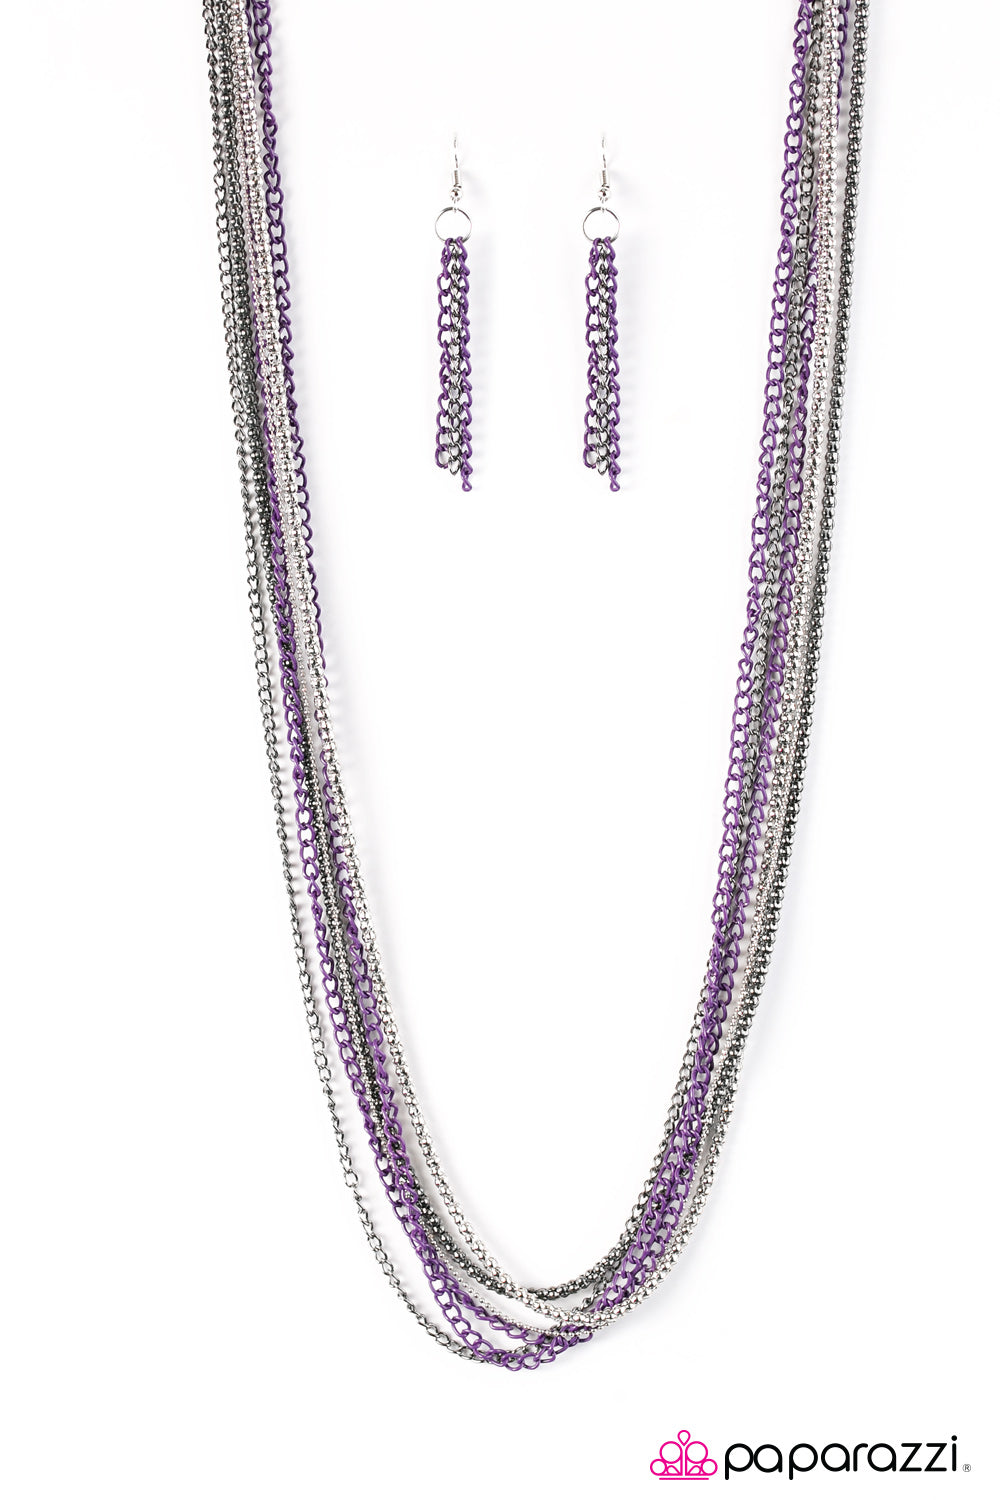 Paparazzi Colorful Calamity - Purple Necklace - Be Adored Jewelry